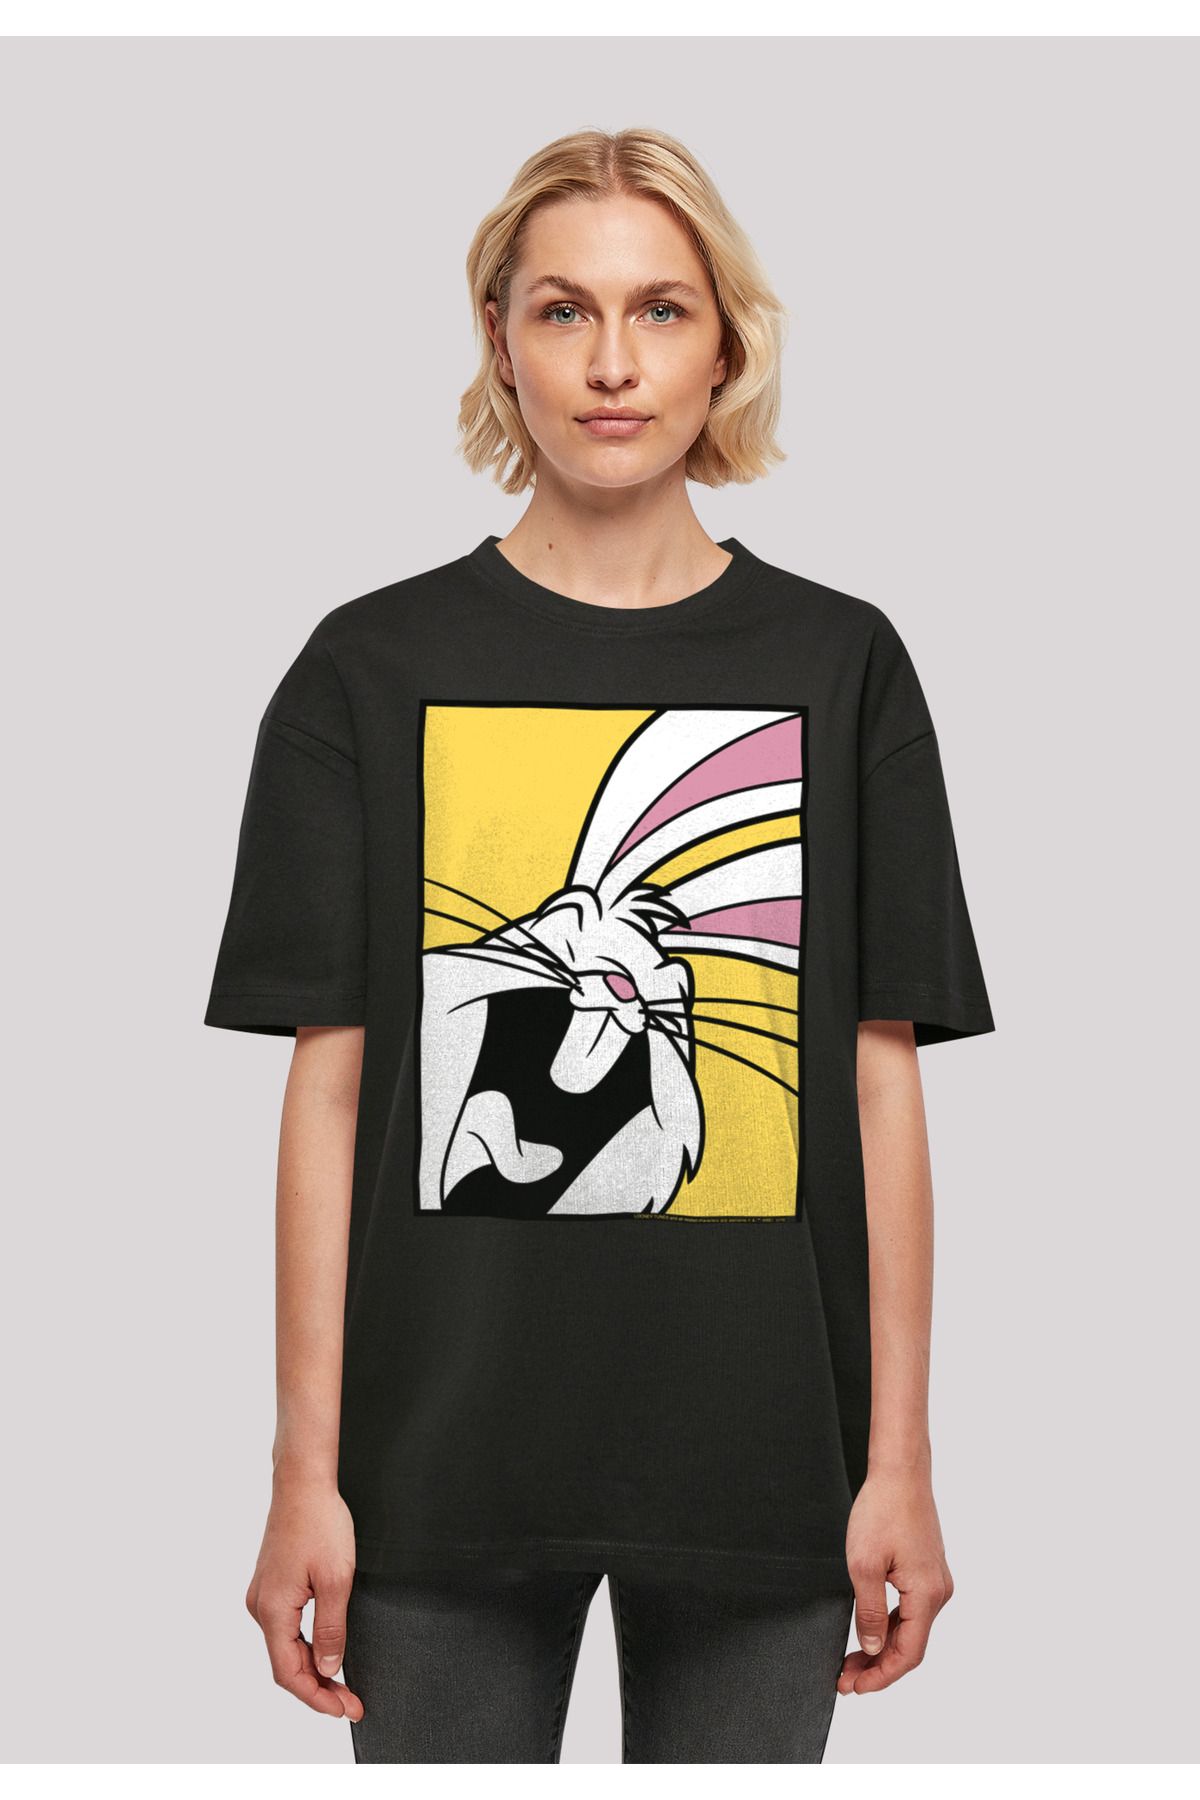 Bunny Laughing with Bugs F4NT4STIC Tunes T-Shirt Oversized Trendyol Looney Damen - Ladies Boyfriend